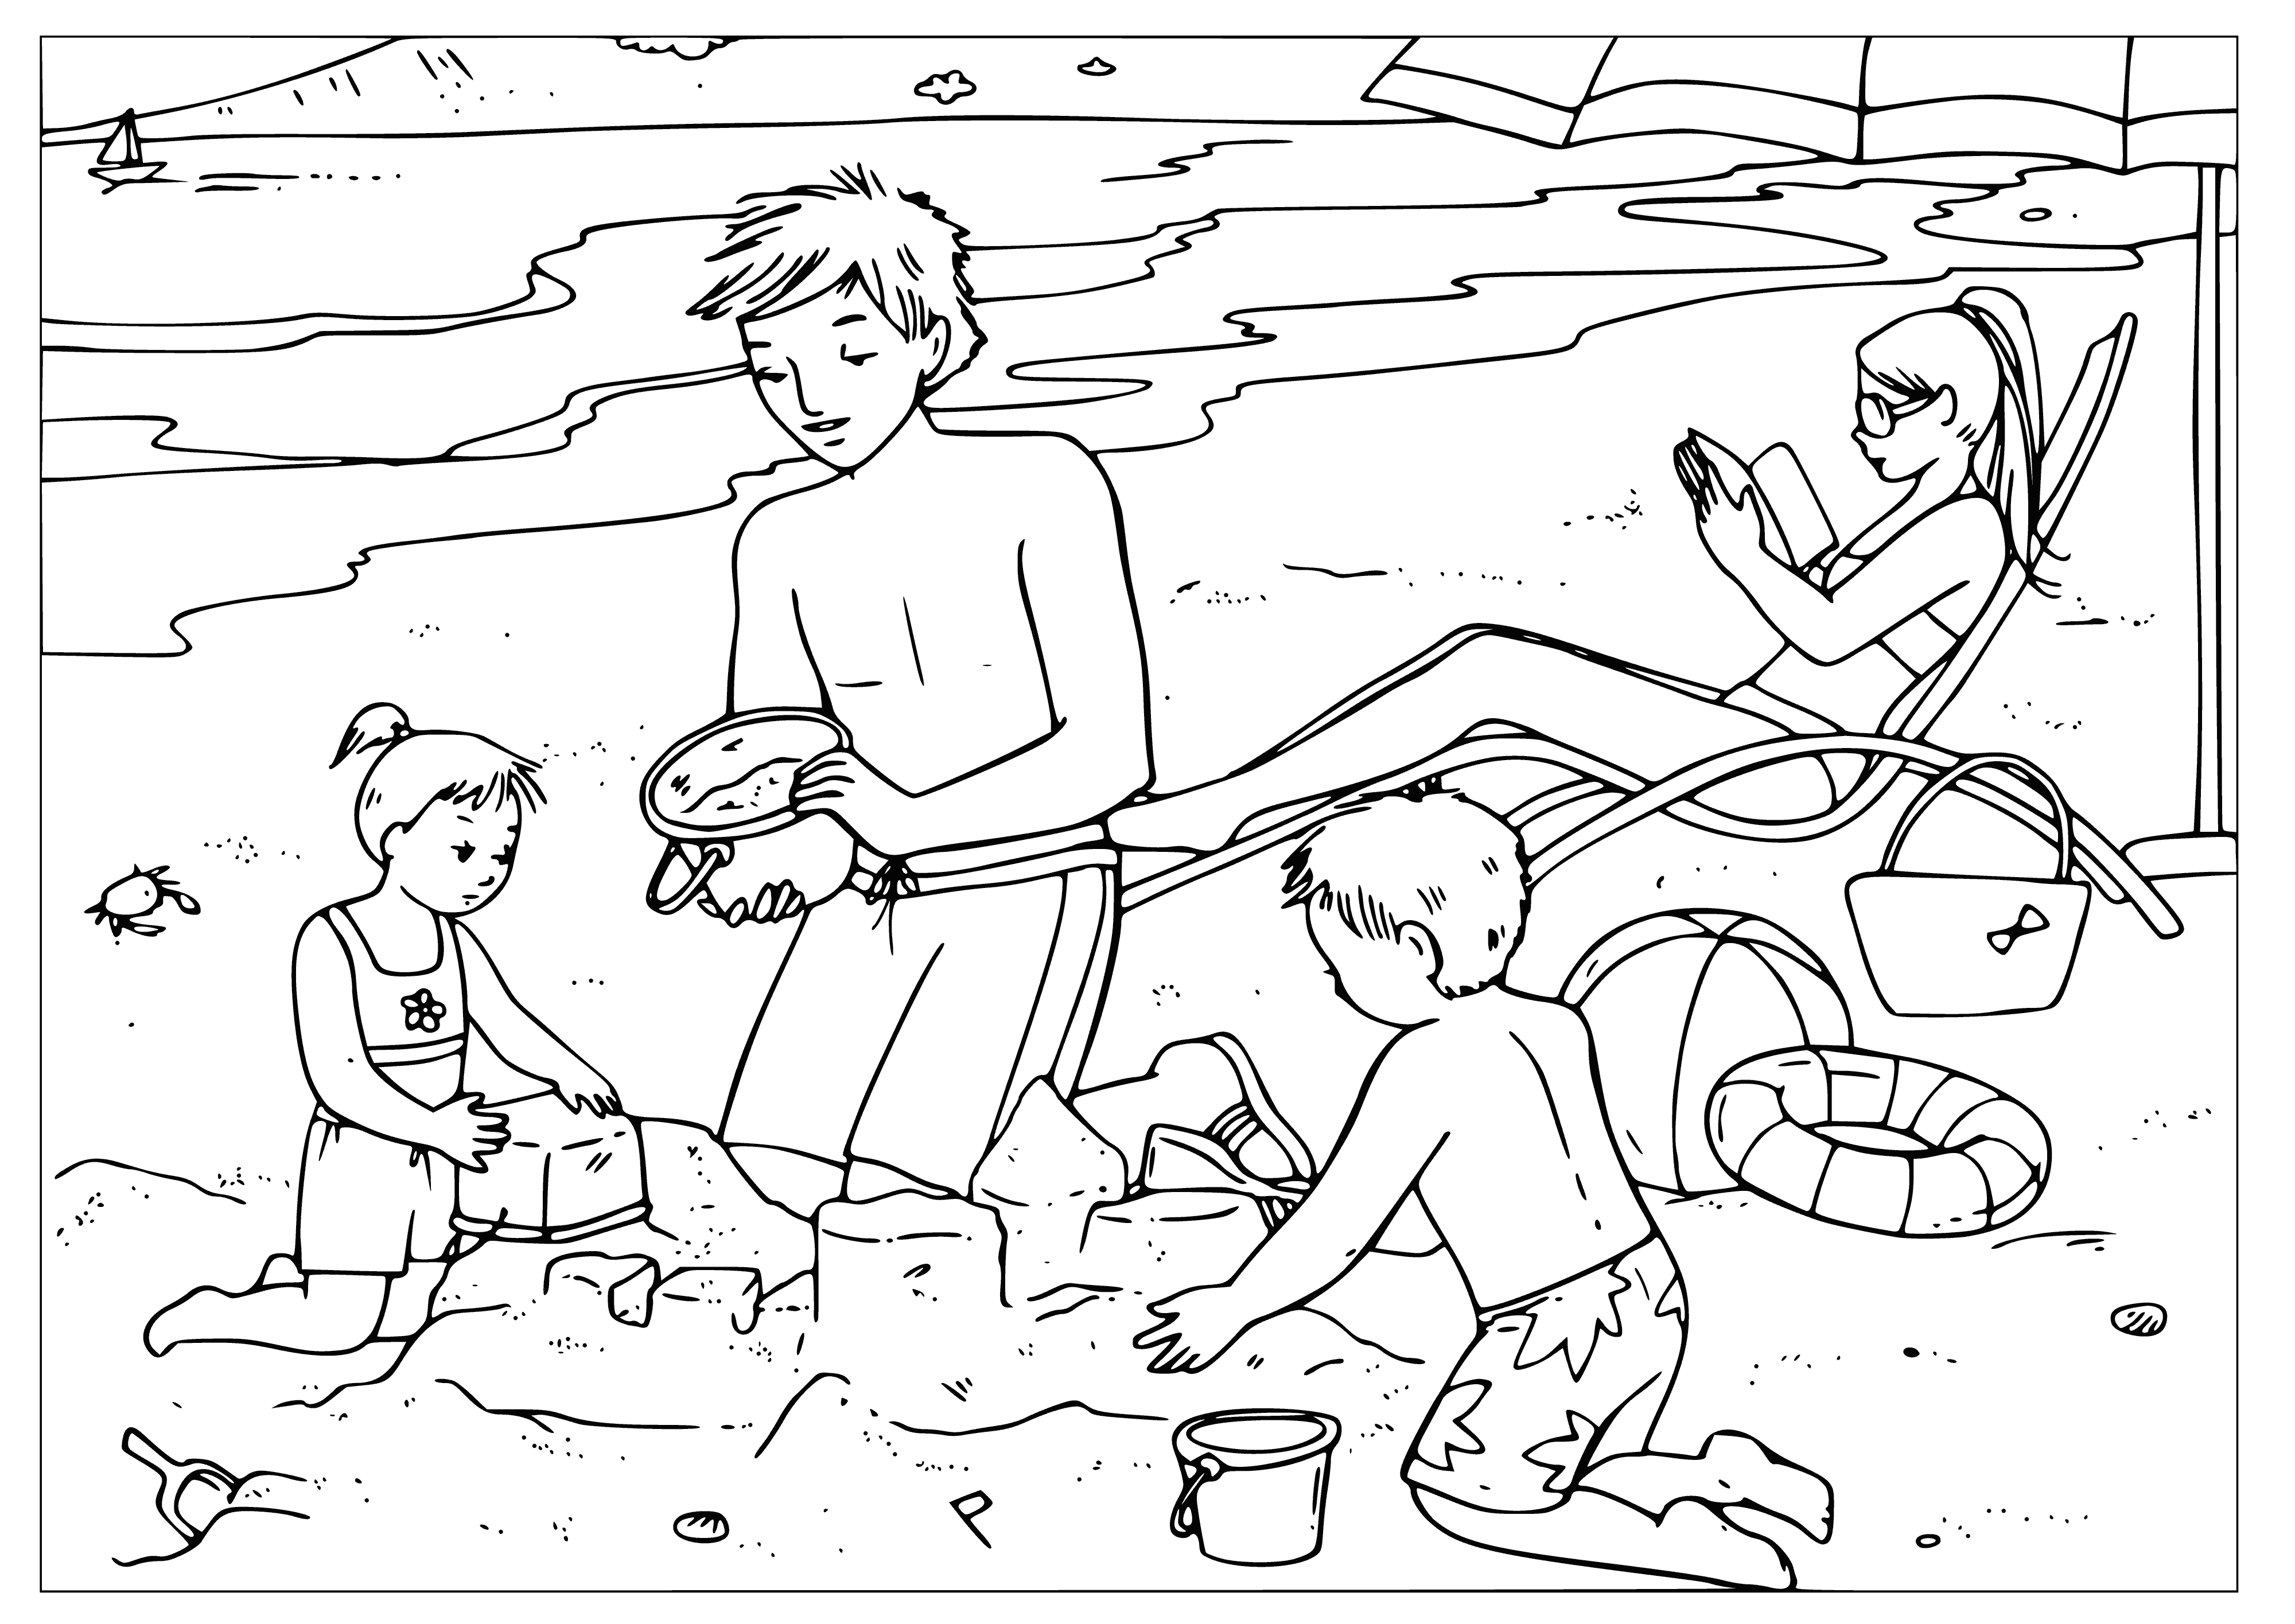 coloring page: 3 kids in coloring page making sand cakes: boy standing, girls sitting, all have sand on hands/clothes.